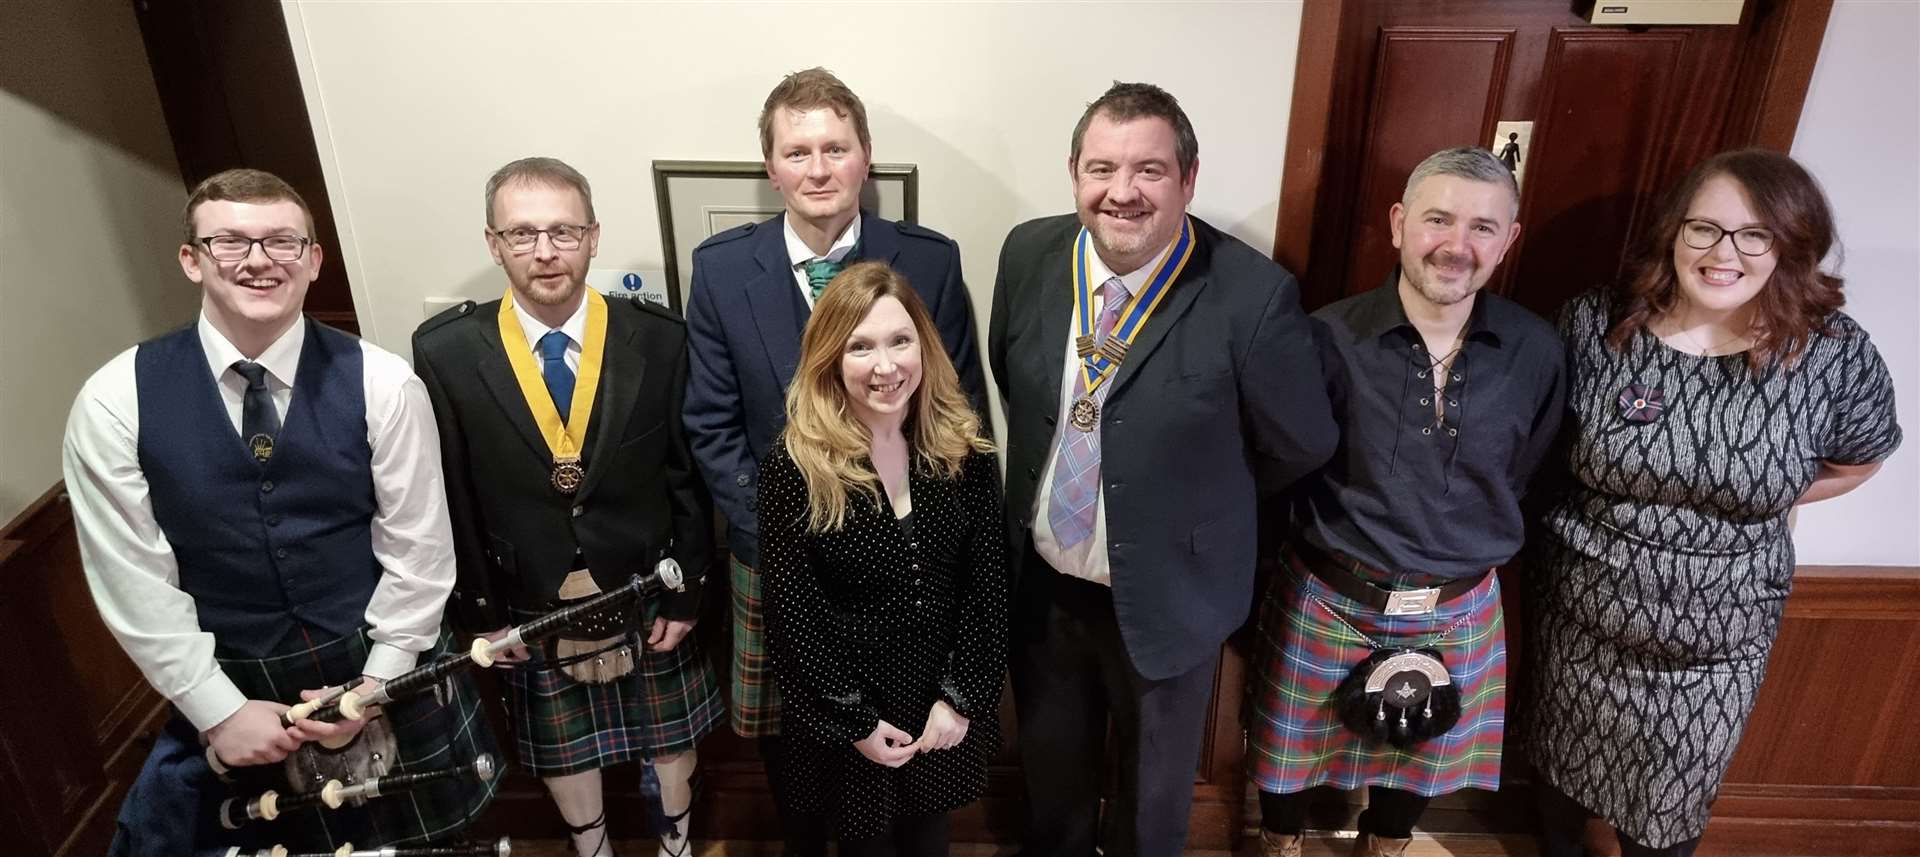 At the Burns Supper (from left) are piper Lewis MacLeod, Thurso Rotary vice-president Derek Sinclair, husband-and-wife team Thomas McAlonan who gave the Toast to the Lassies and Kathy McAlonan who replied on behalf of the Ladies, Rotary president Daryl Pickering, Mark Davenport who gave the Address to the Haggis and Jacqui Barclay who gave the Immortal Memory.